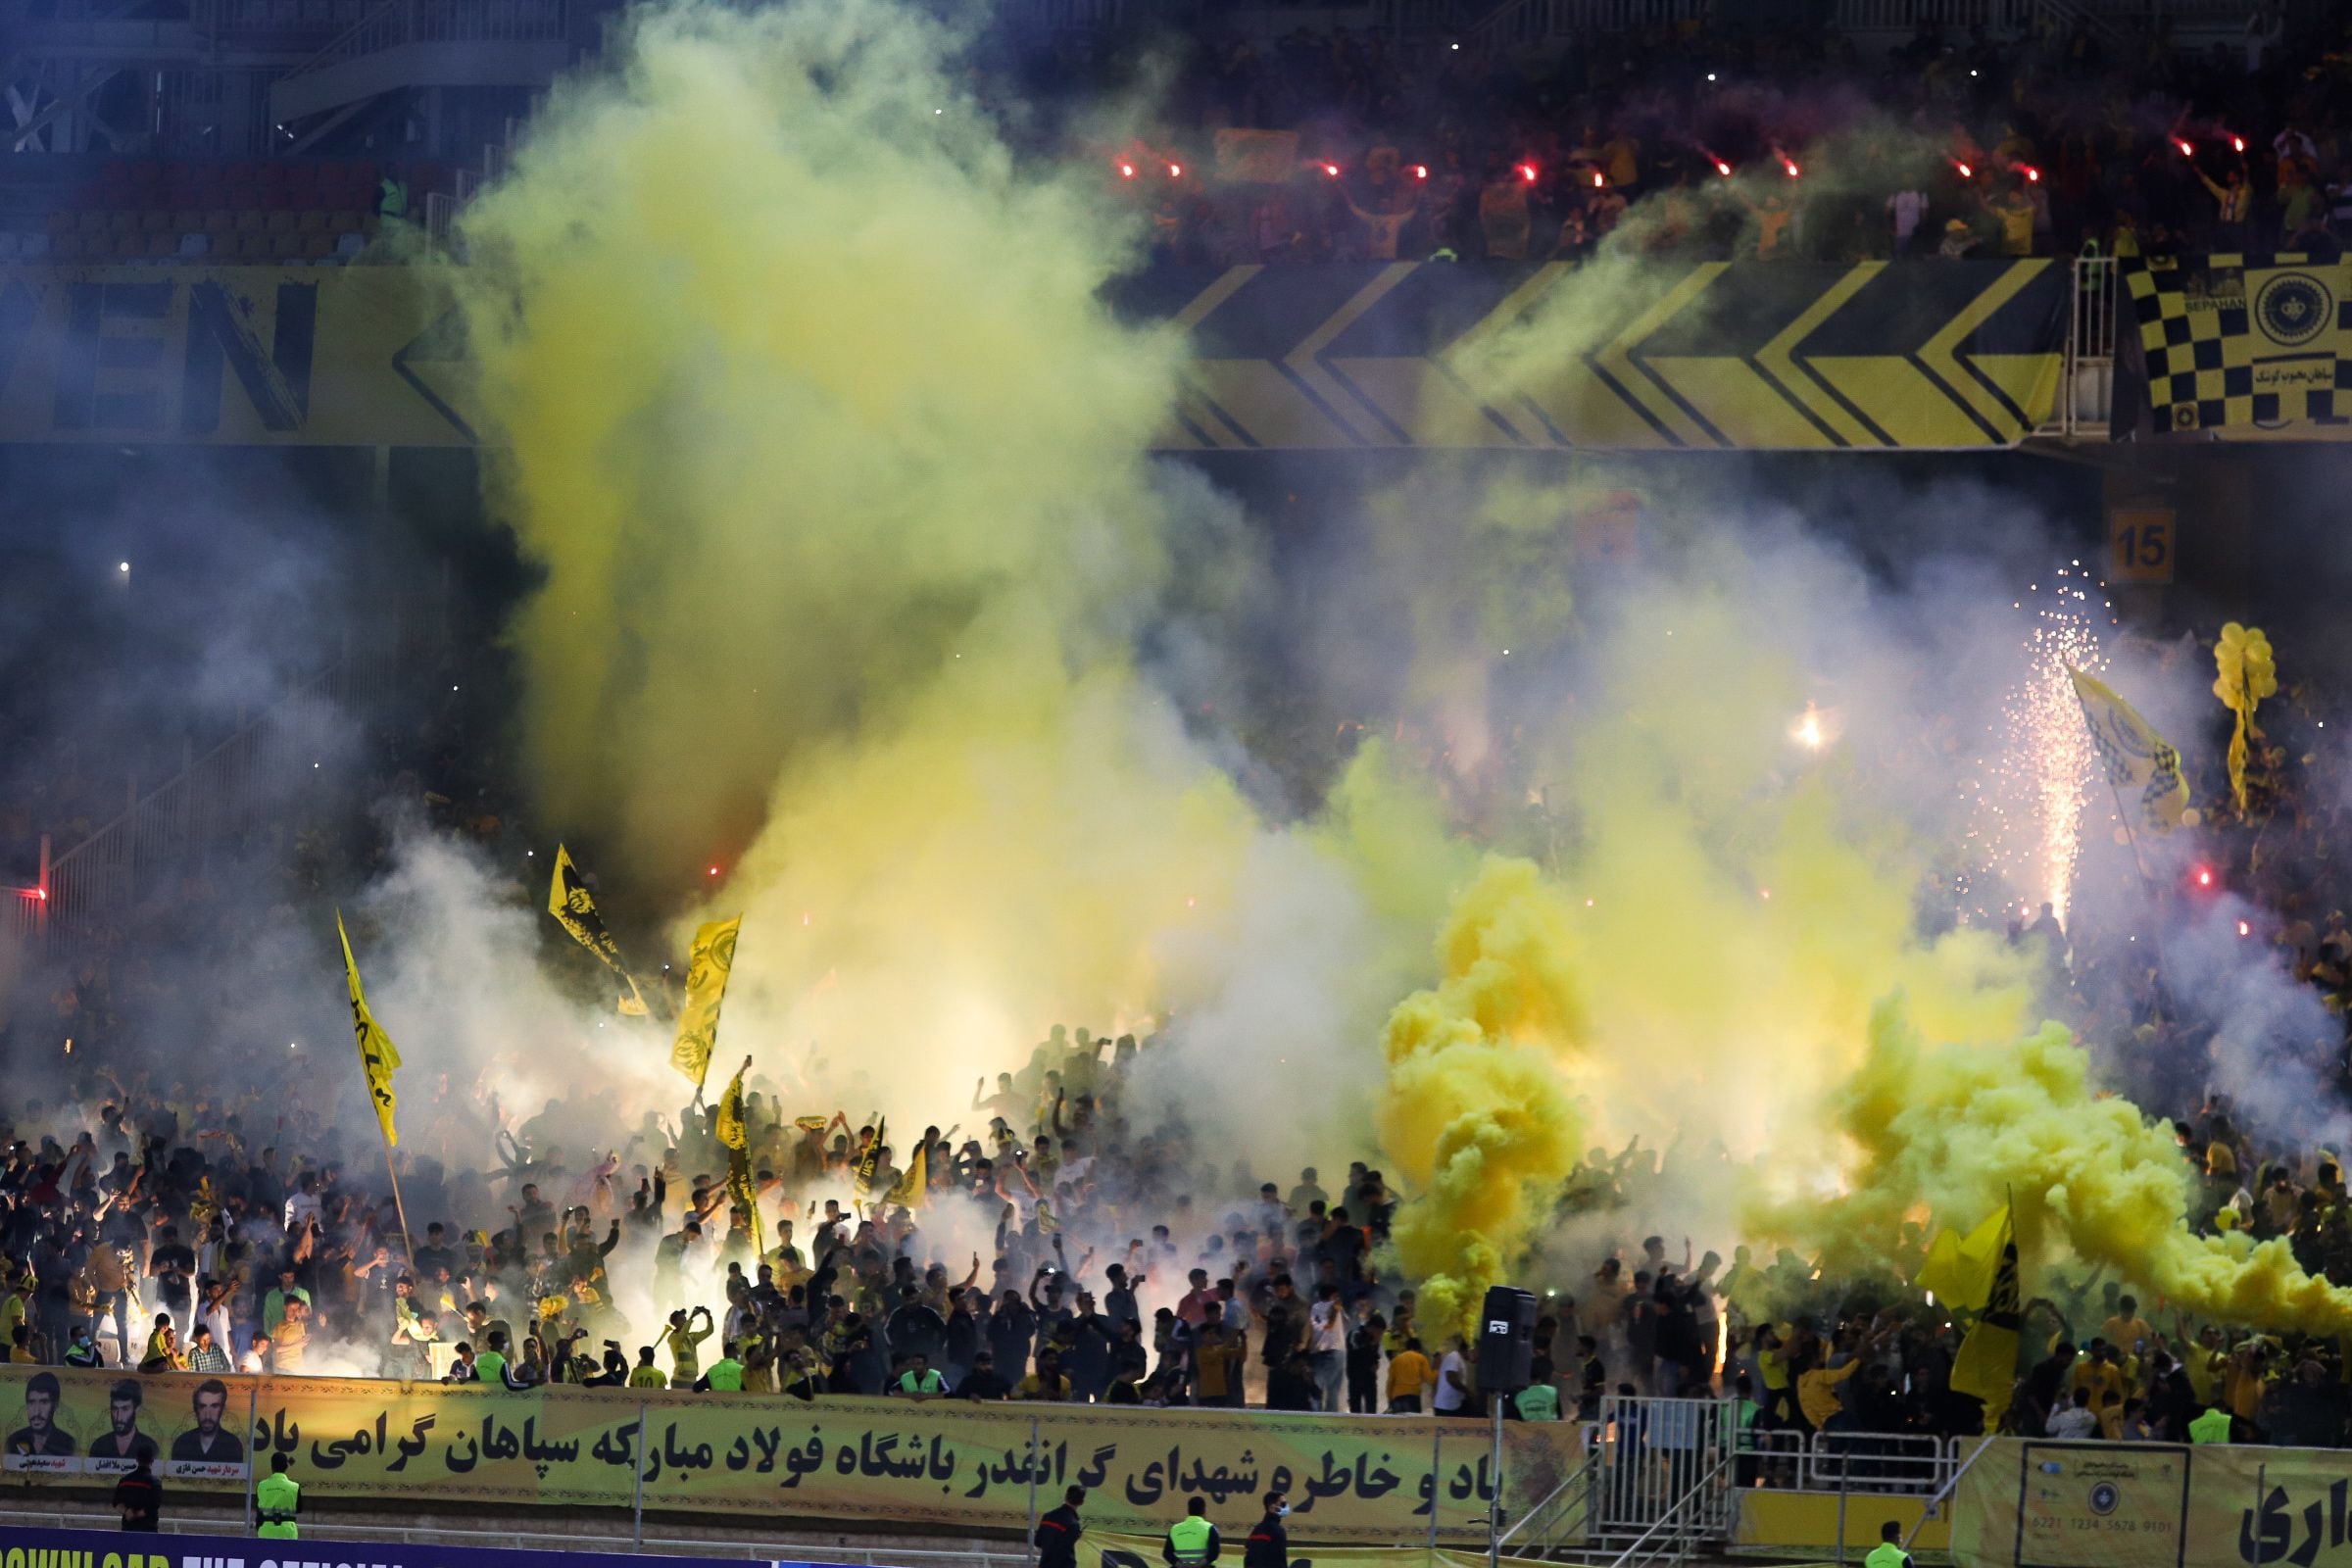 The AFC Champions League match between Al Ittihad and Sepahan is